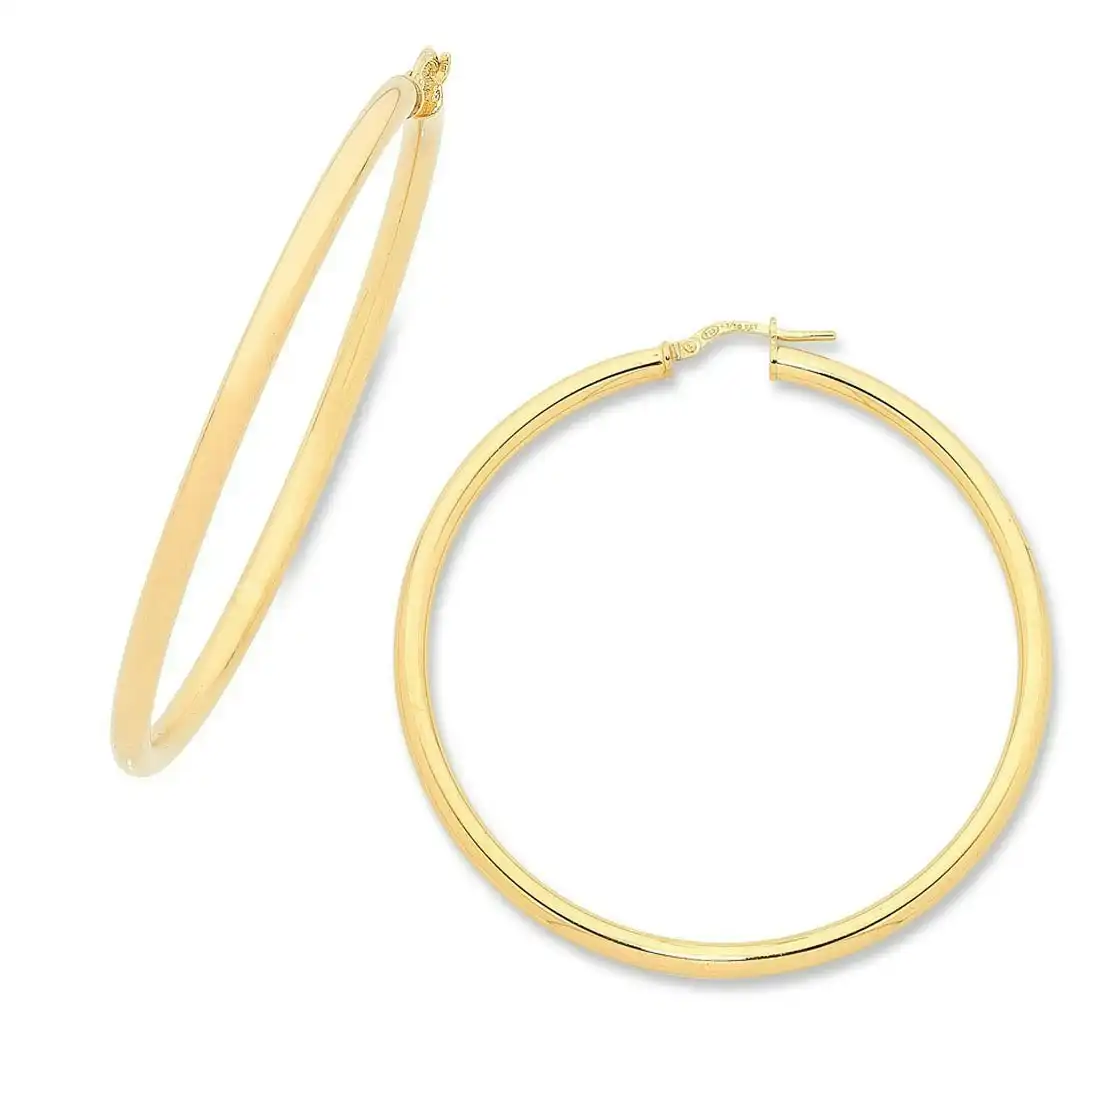 9ct Yellow Gold Silver Infused Hoop Earrings 50mm